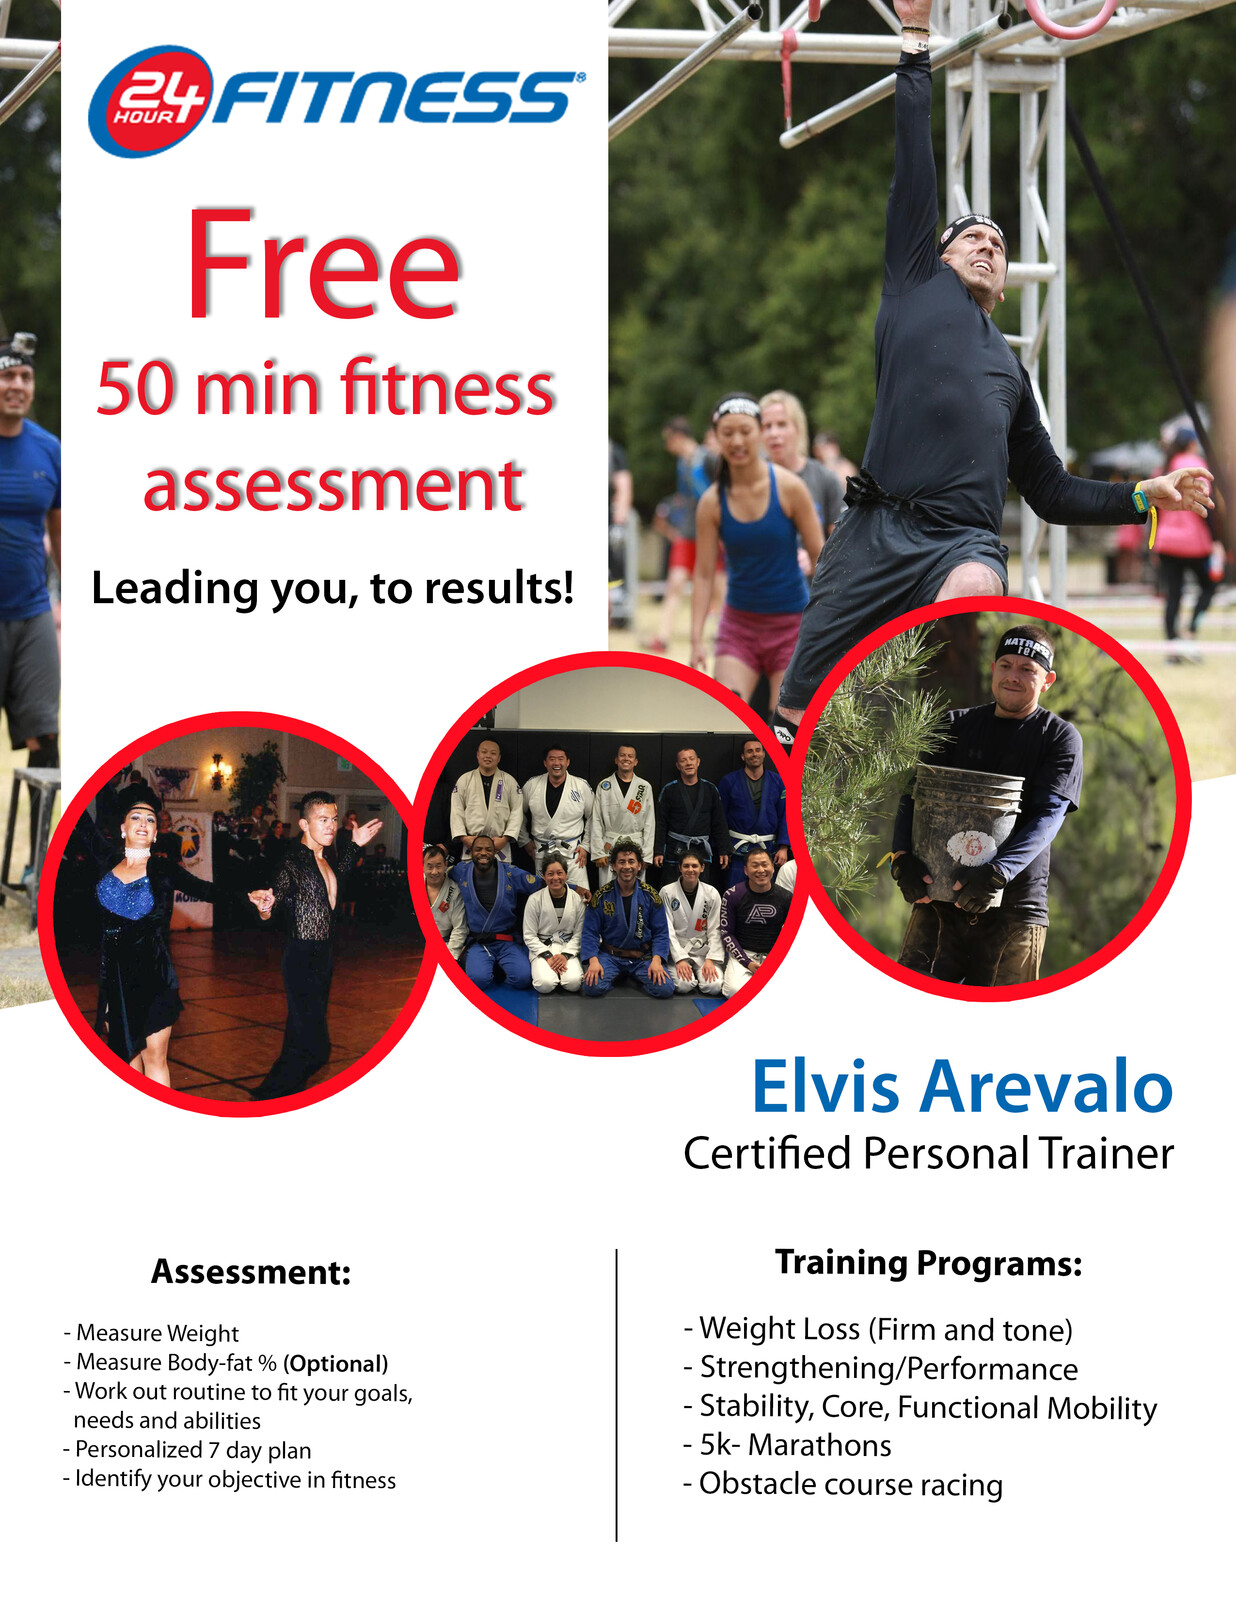 Personal trainer Promotional Brochure for 24 hour fitness